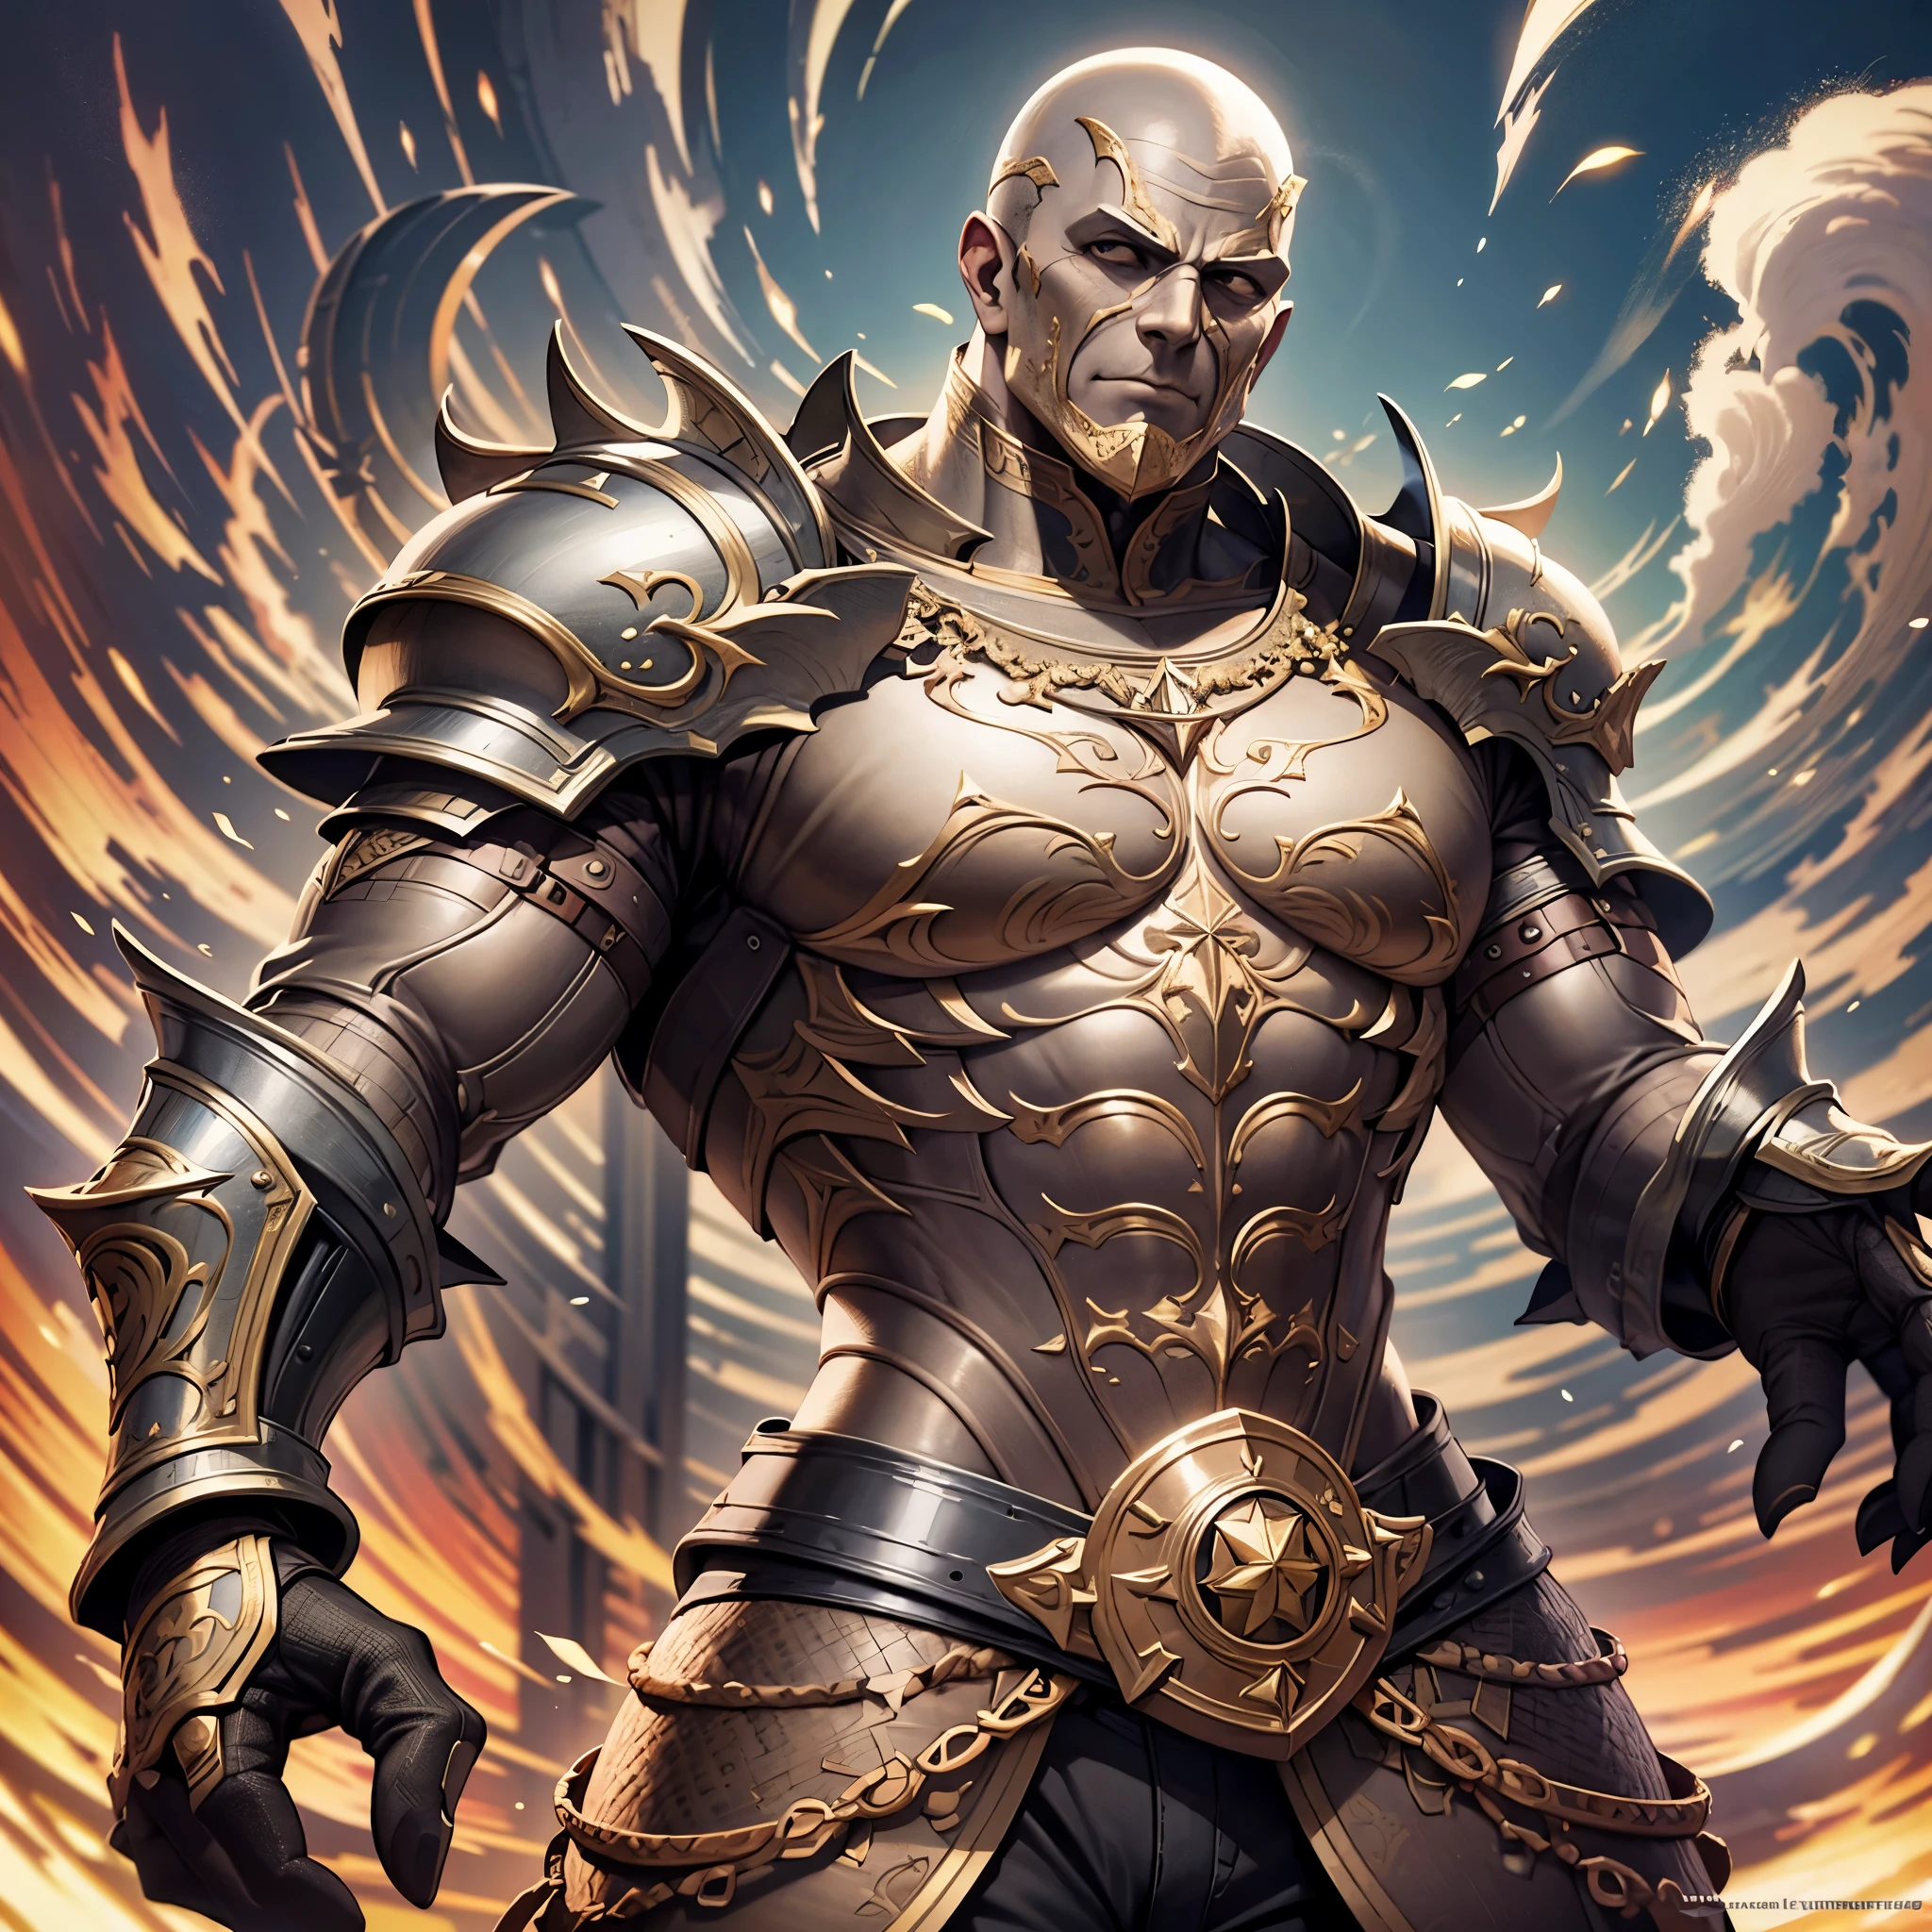 Full length portrait of a black muscular warrior in anime style, showcasing intricately detailed muscles and heavy dark armor. His bald head shines under atmospheric lighting, with striking light and shadow effects creating an intriguing contrast. This highly detailed digital painting exudes an advanced anime art aesthetic, perfect for station art or concept illustrations. With a soft yet sharp focus, every line and texture is rendered in stunning 8k resolution, bringing the intricacies of the warrior's physique to life. Crafted by the renowned artists Makoto Shinkai and Stanley Artgerm Lau, this masterpiece is sure to leave a lasting impression on viewers, gracing the halls of ArtStation and other prest